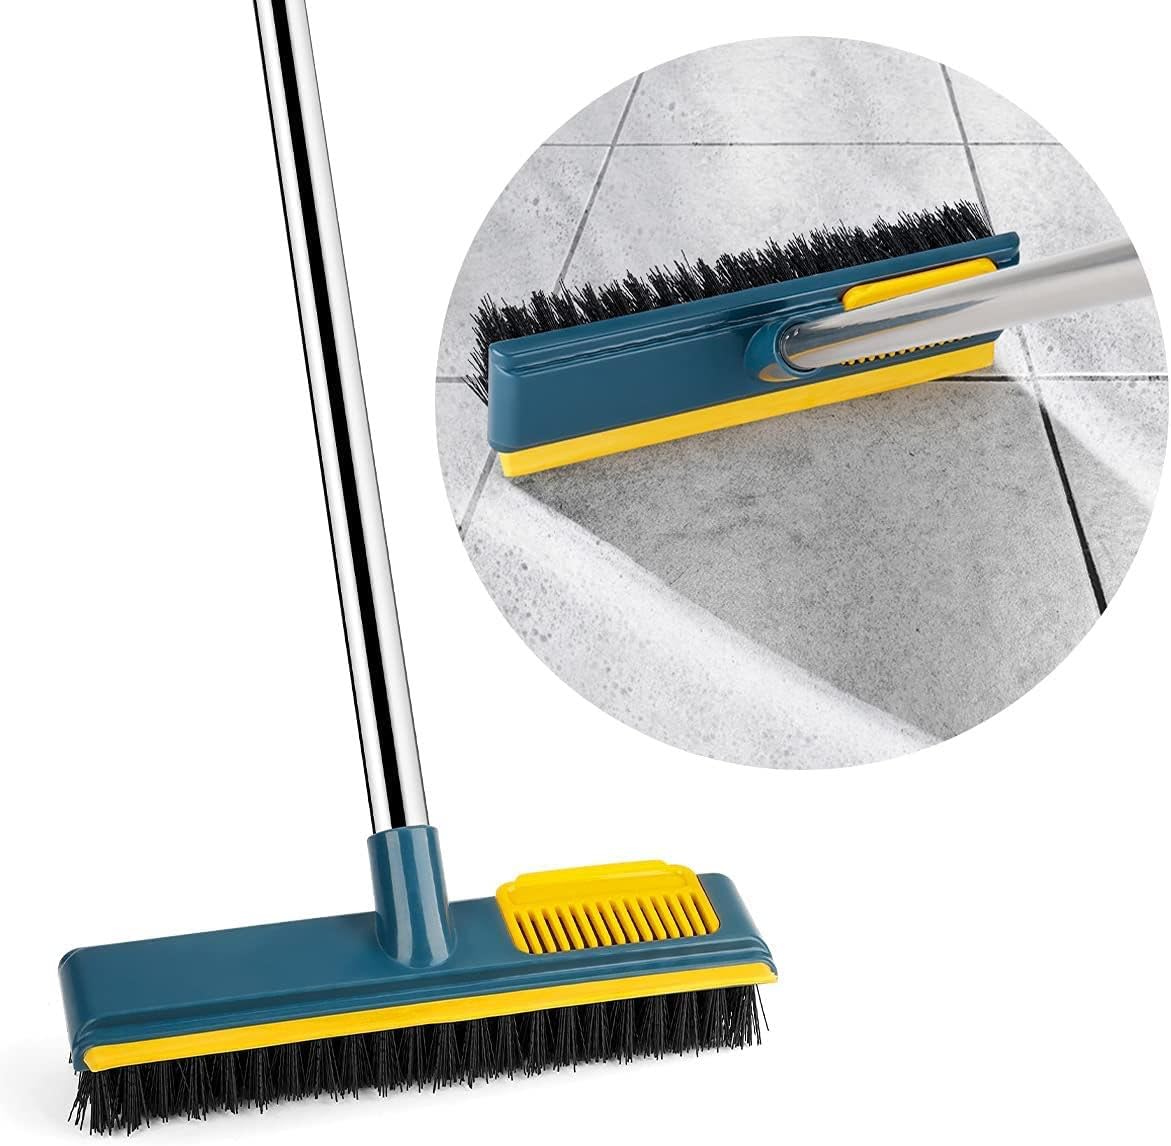 VODIQ Floor Scrub Brush with Squeegee, 2 in 1 Scrape Brush with Firm Long Handle Stiff Bristle Scrubber for Cleaning Tub Tile Bathroom Patio Kitchen Wall Deck with a Free Toilet Brush (Green)